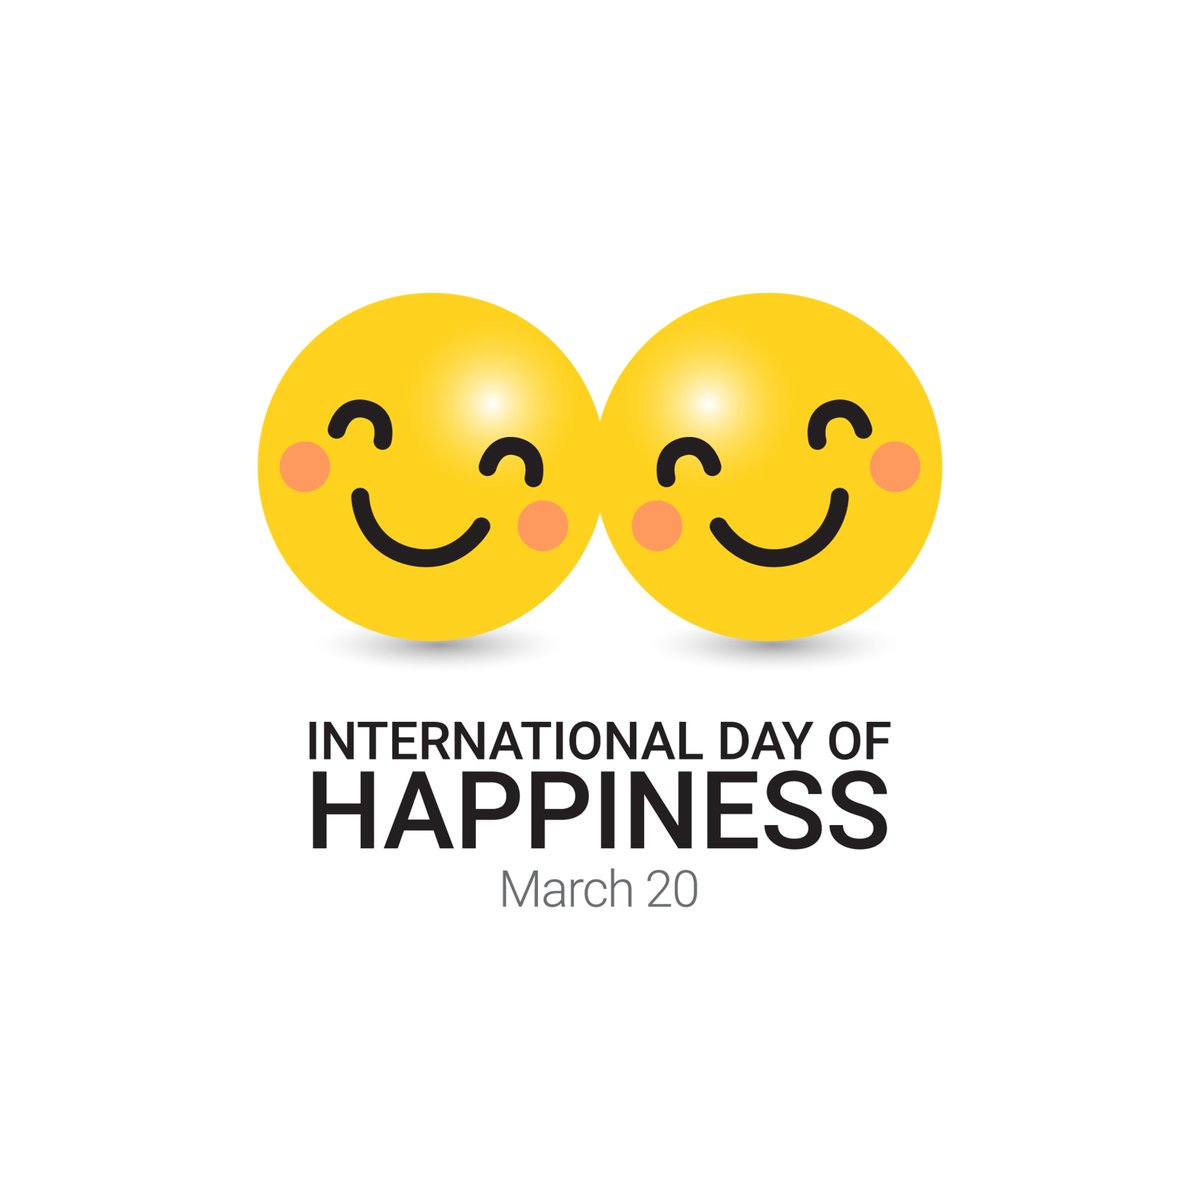 Its International Day of Happiness. Happiness is important to our health and wellbeing. This years theme 'Building a better world together' focuses on the effort and resilience to cultivate happiness on a global scale. Be happy with your day today.